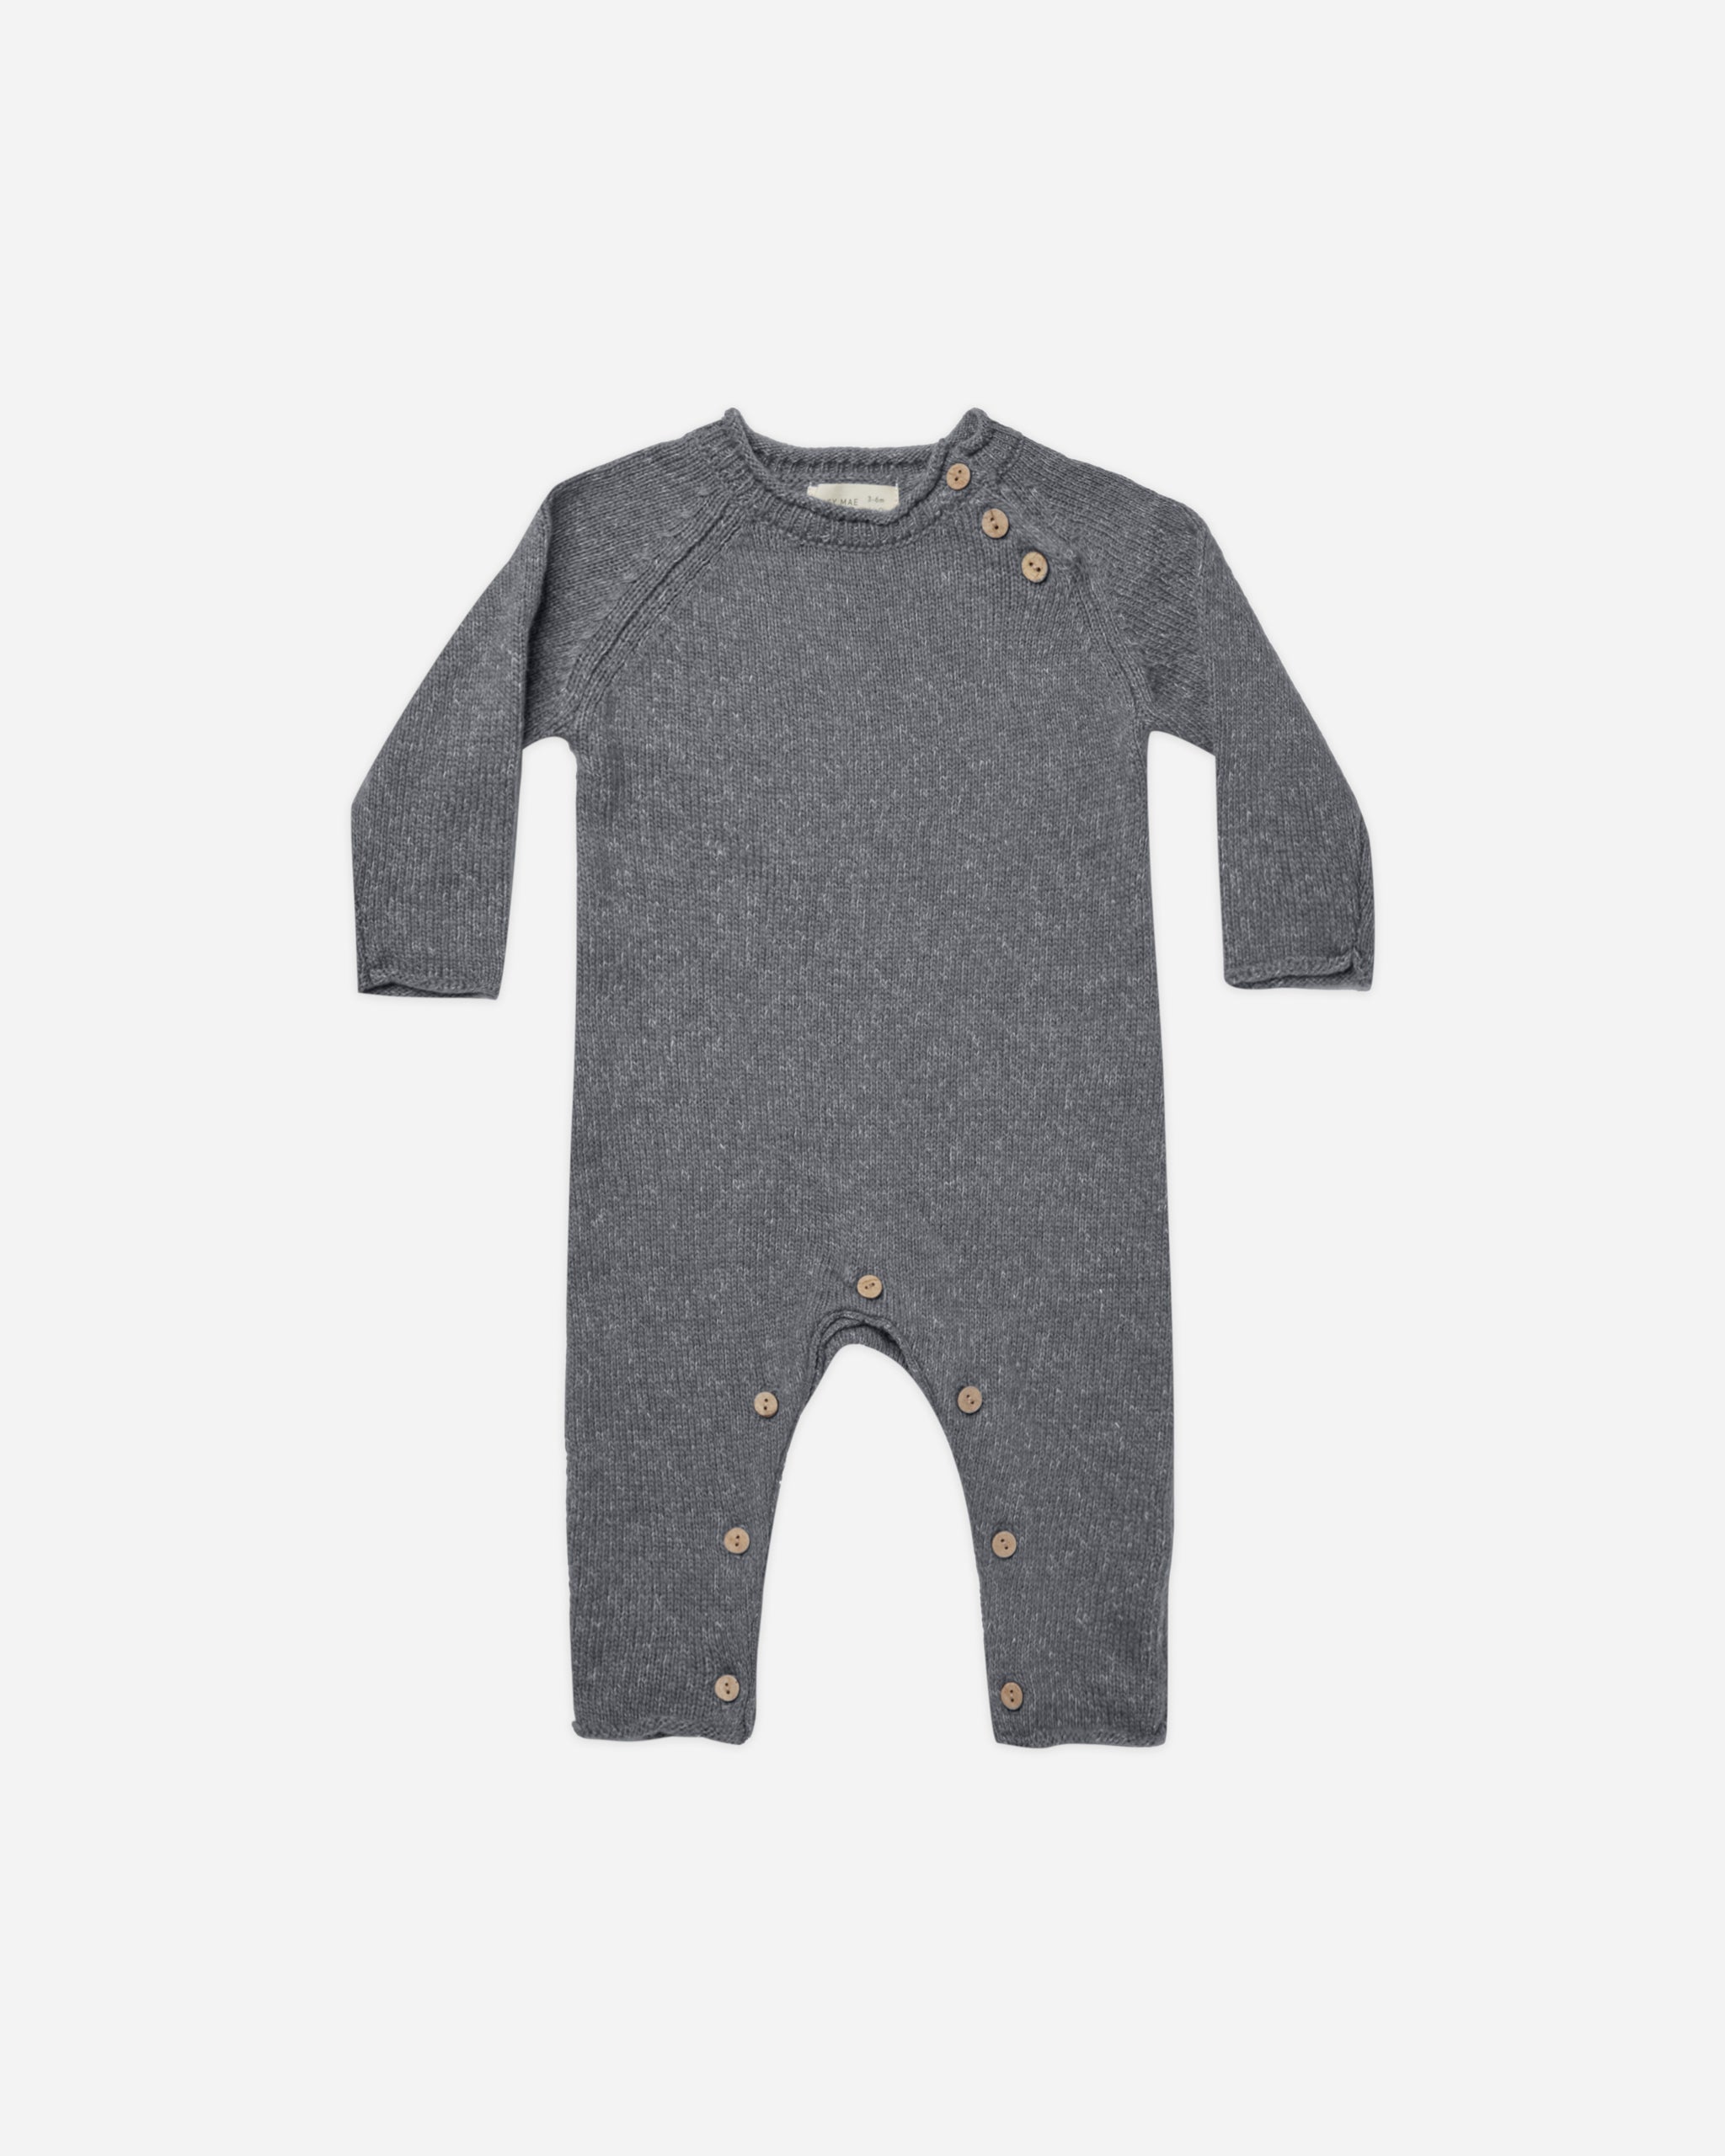 Cozy Heather Knit Jumpsuit || Navy - Rylee + Cru | Kids Clothes | Trendy Baby Clothes | Modern Infant Outfits |